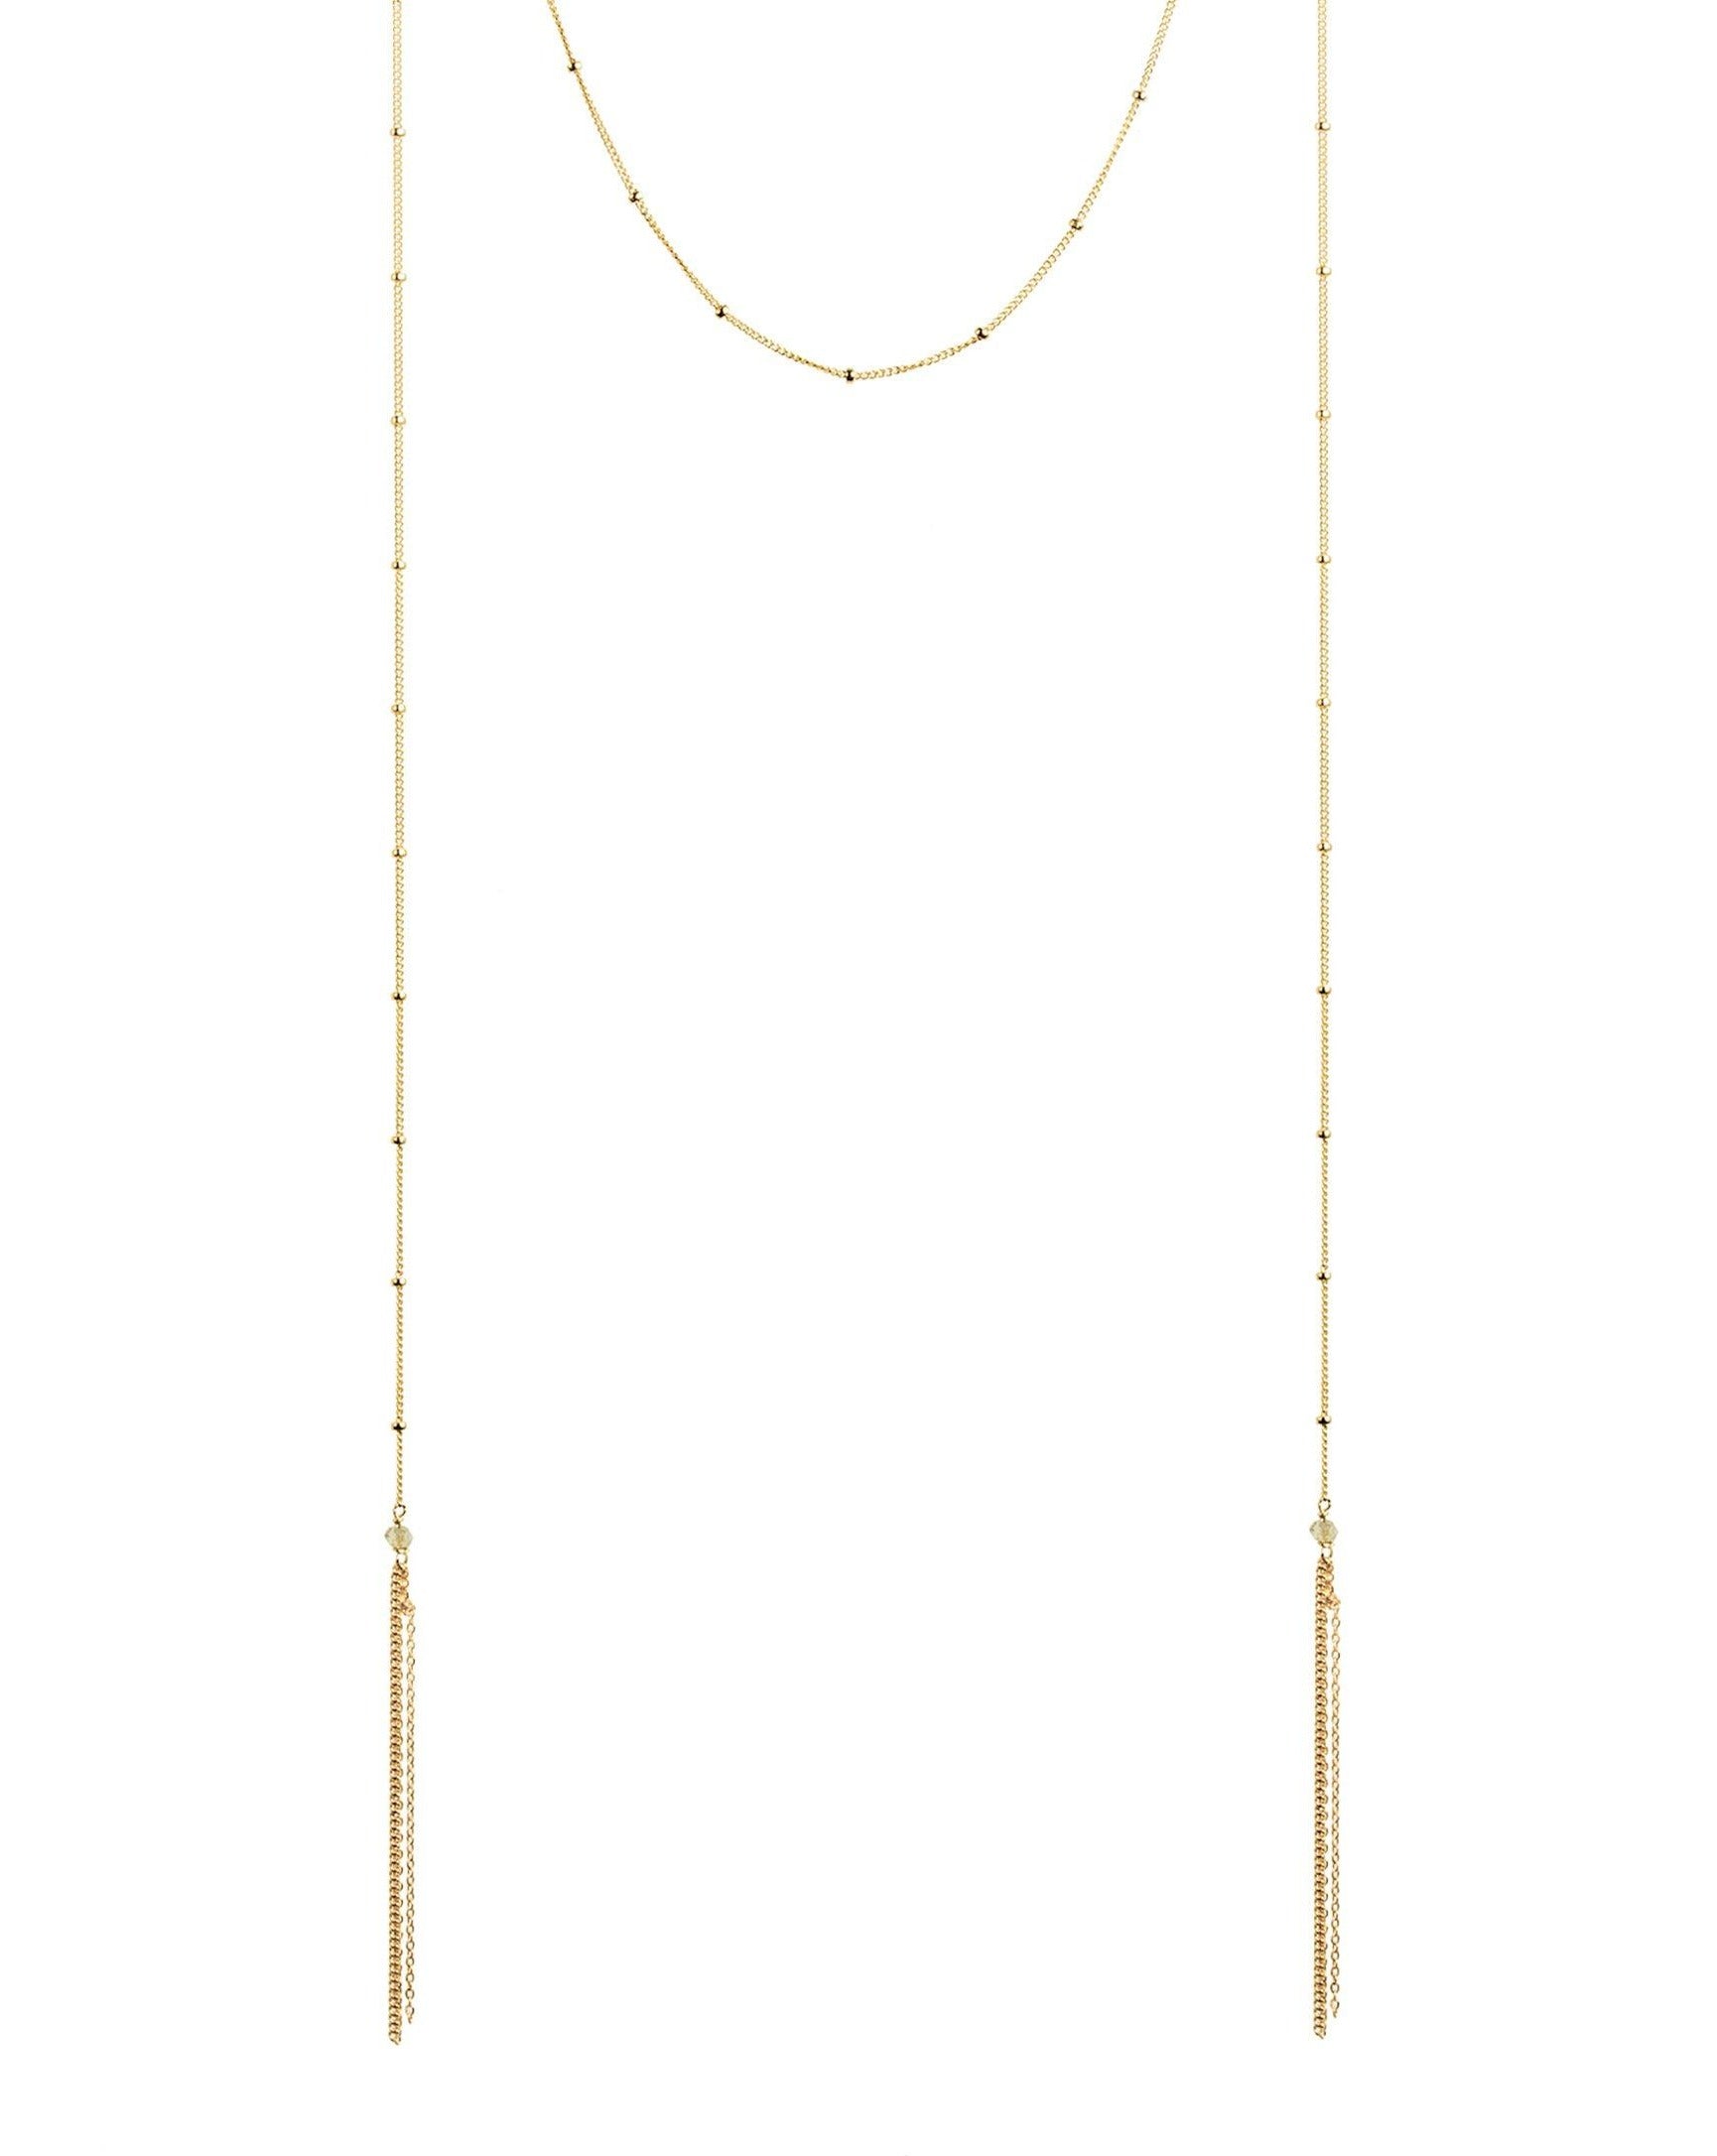 Doss Necklace by KOZAKH. A 14K Gold Filled necklace with adjustable length from 40 inches, featuring faceted Labradorite.